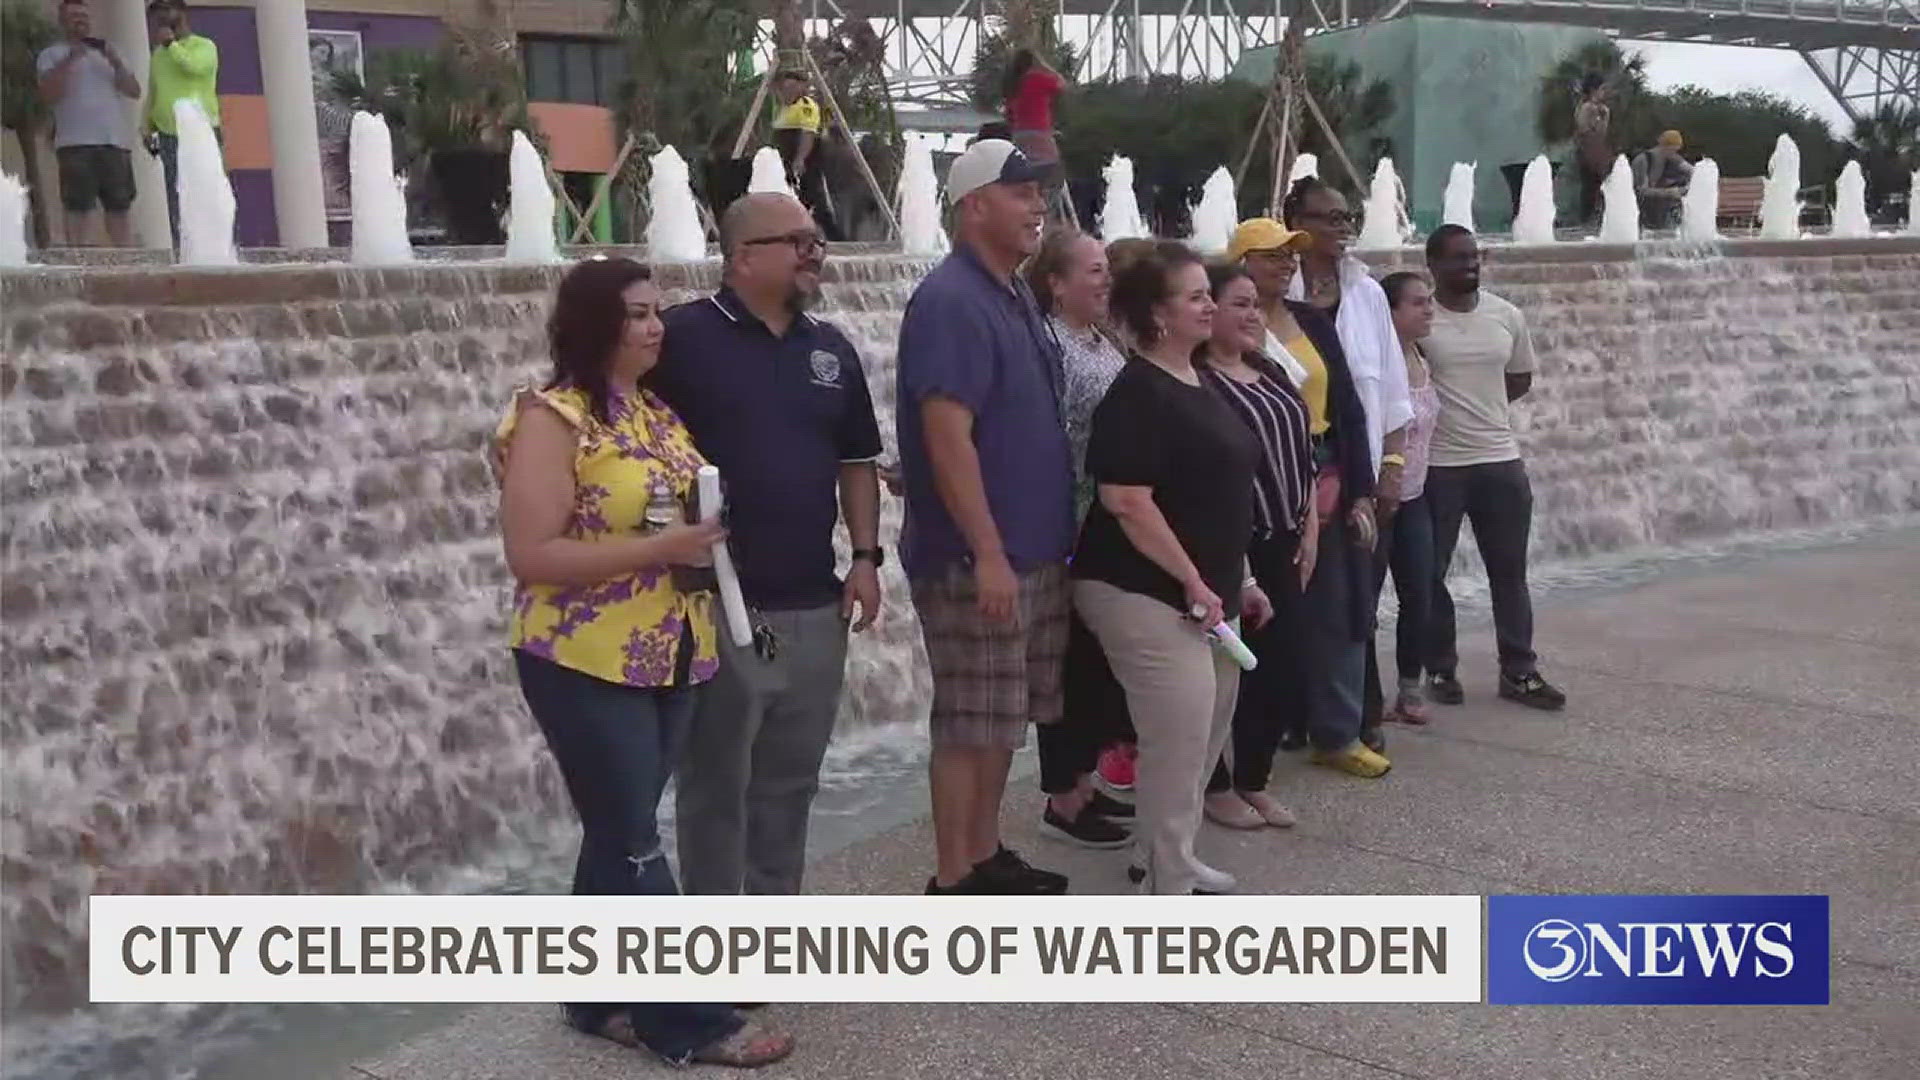 Many community members gathered at the beloved Watergarden to see the upgrades first hand.